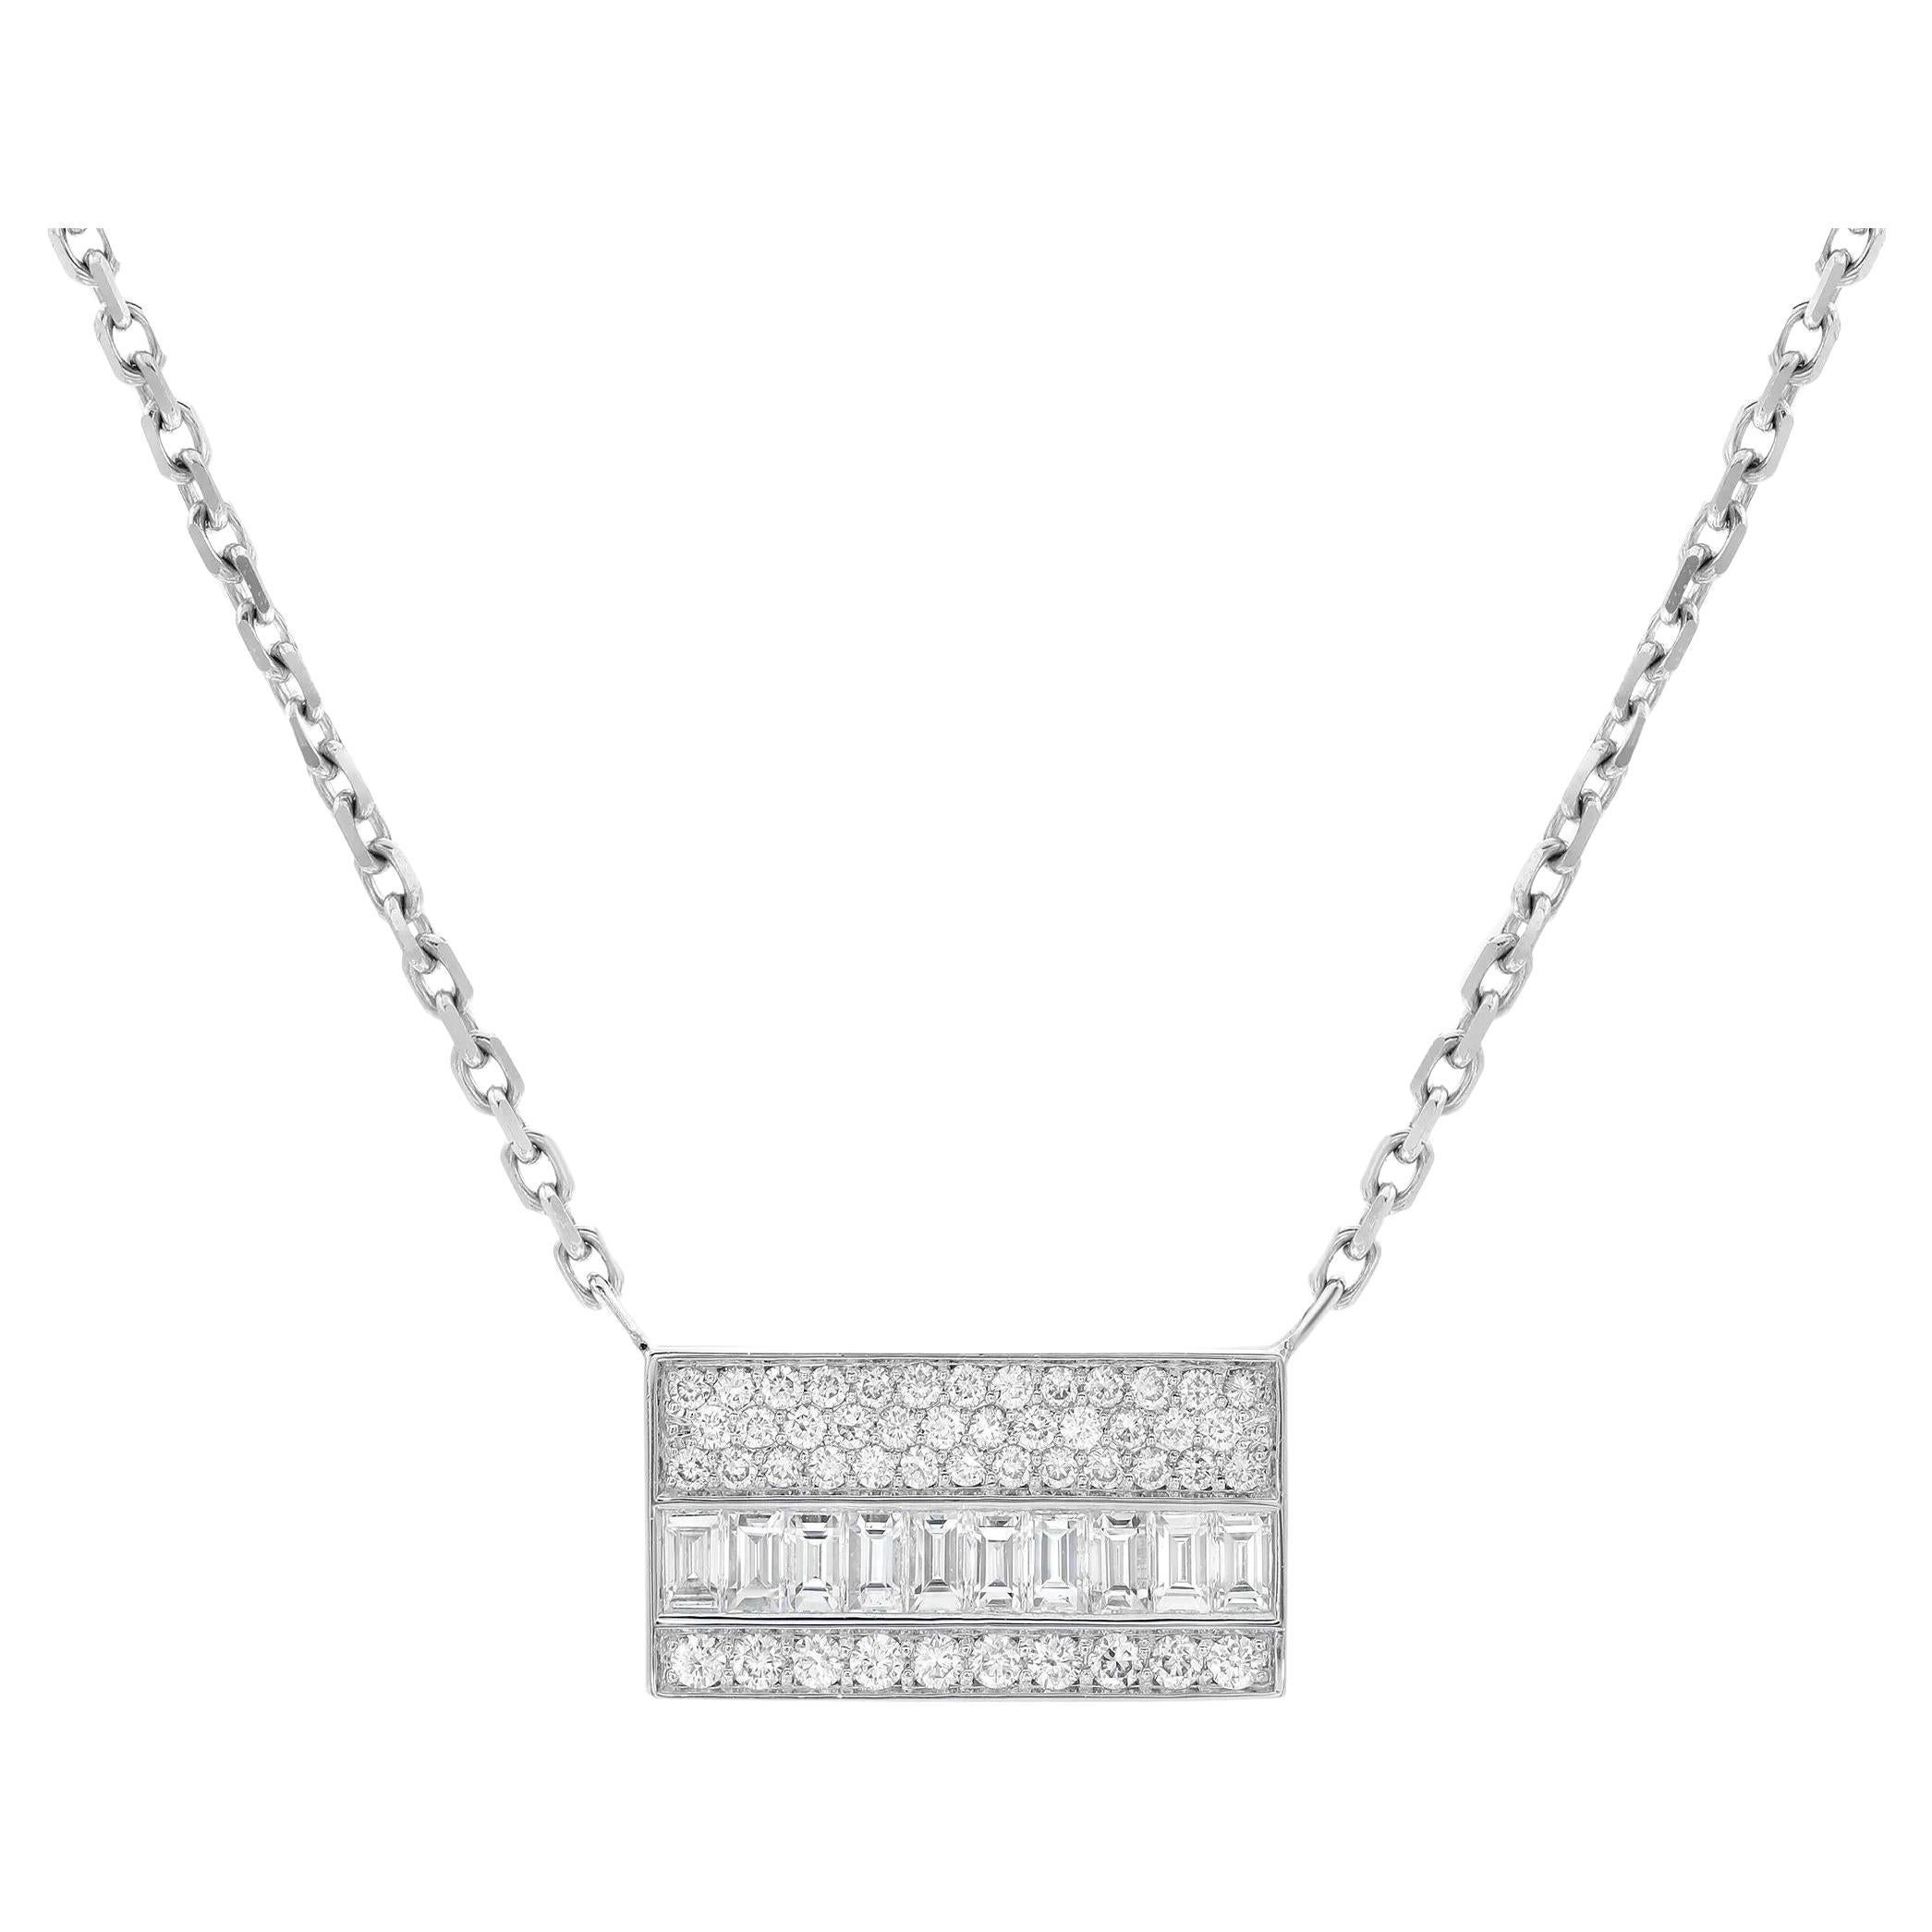 Messika 0.72Cttw Liz Diamond Pendant Chain Necklace 18K White Gold 17 Inches For Sale